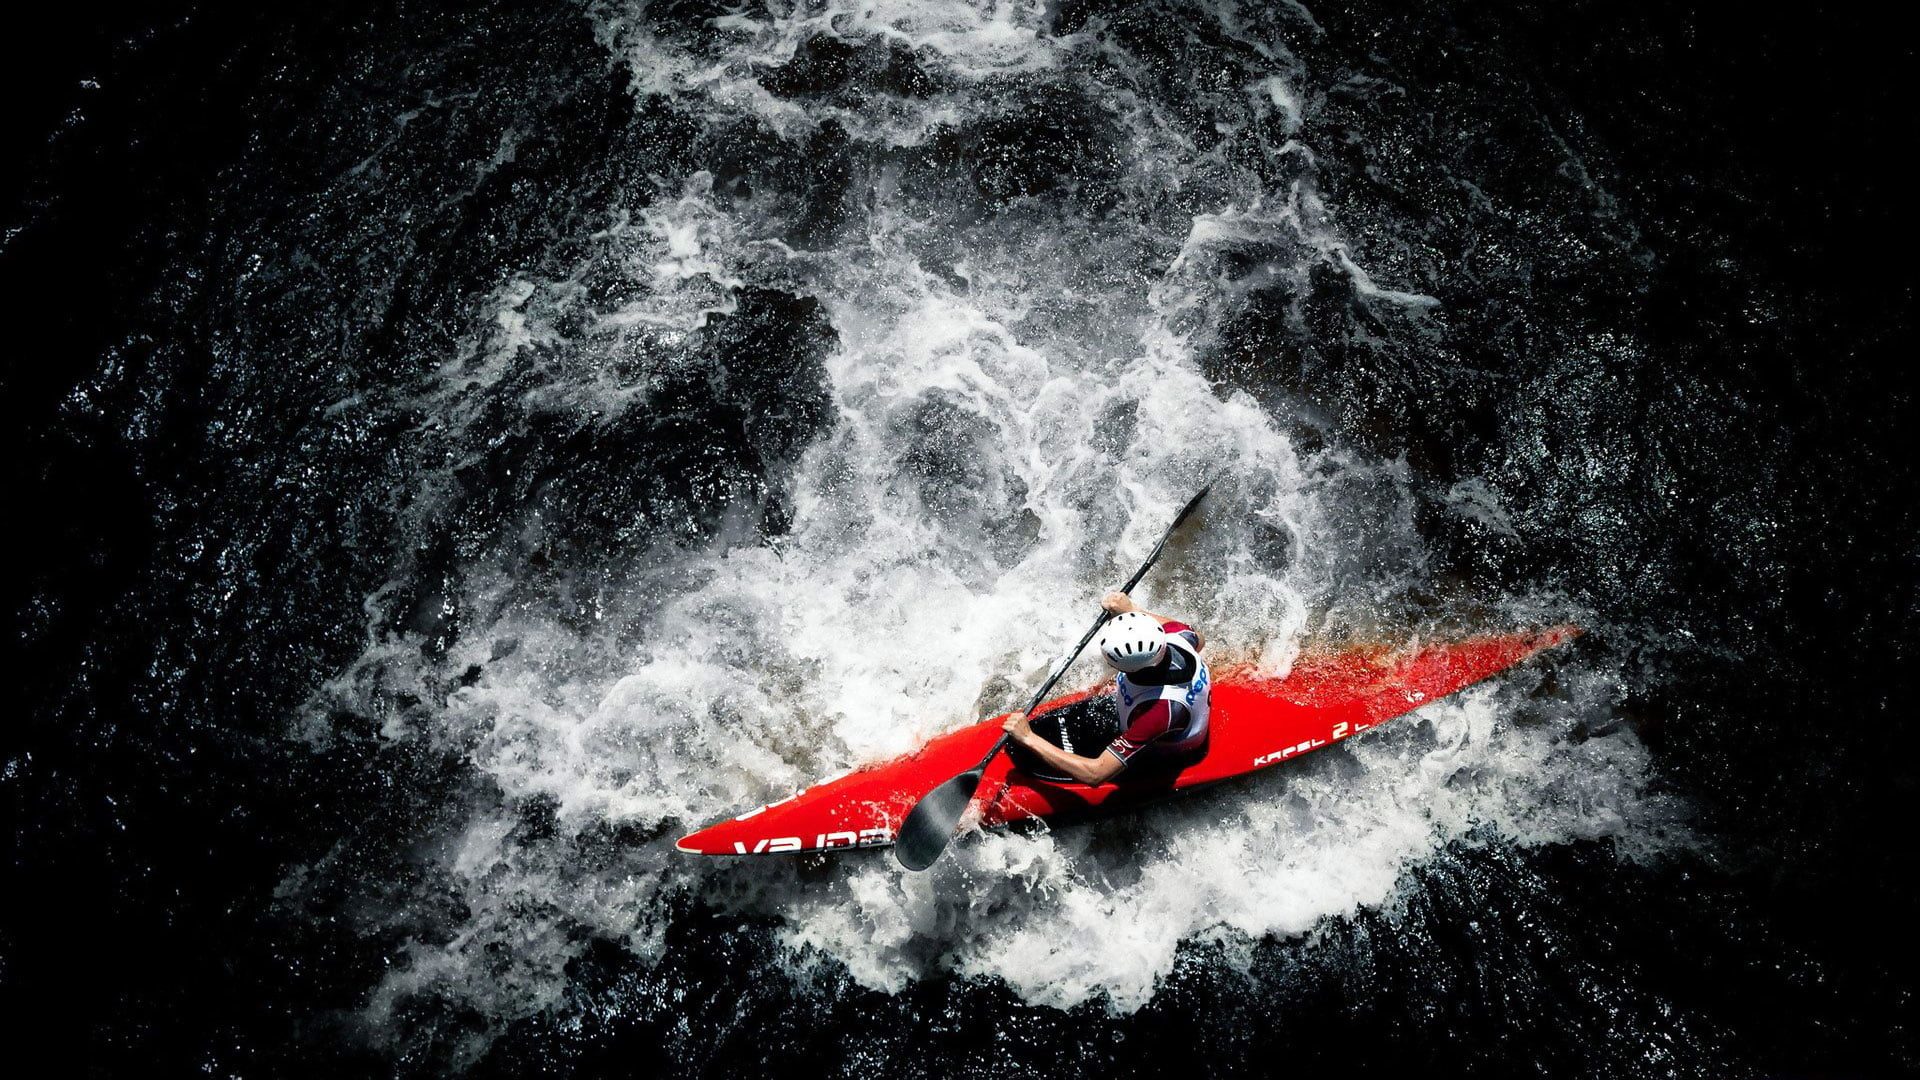 Canoeing: Monochrome whitewater kayaking, A boating activity of a high risk. 1920x1080 Full HD Background.